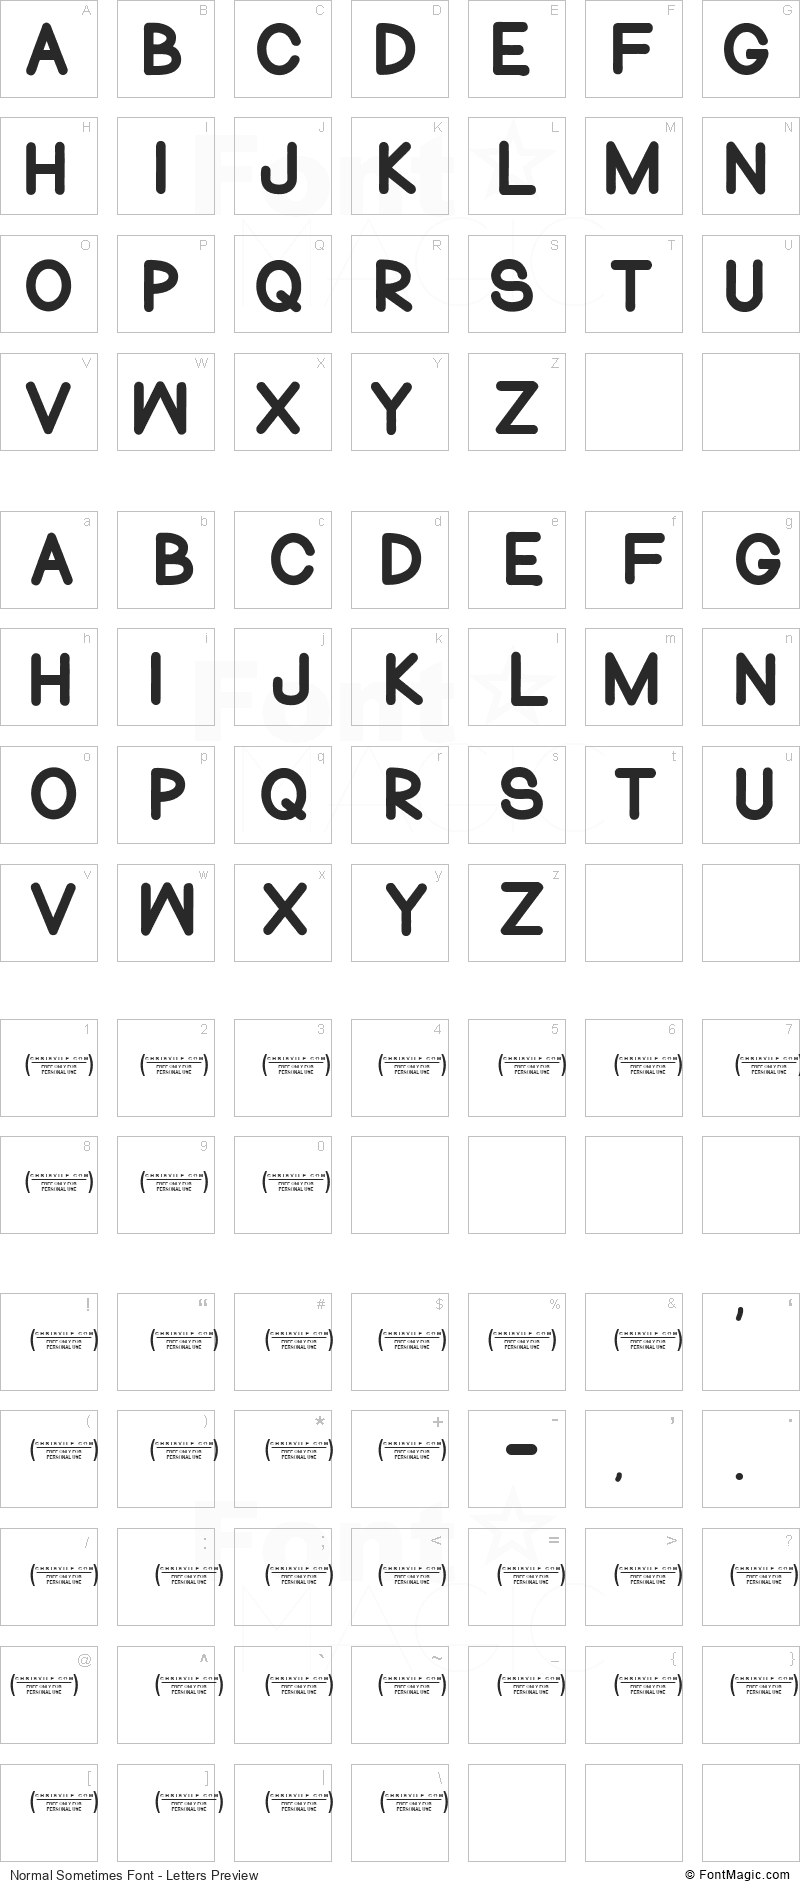 Normal Sometimes Font - All Latters Preview Chart